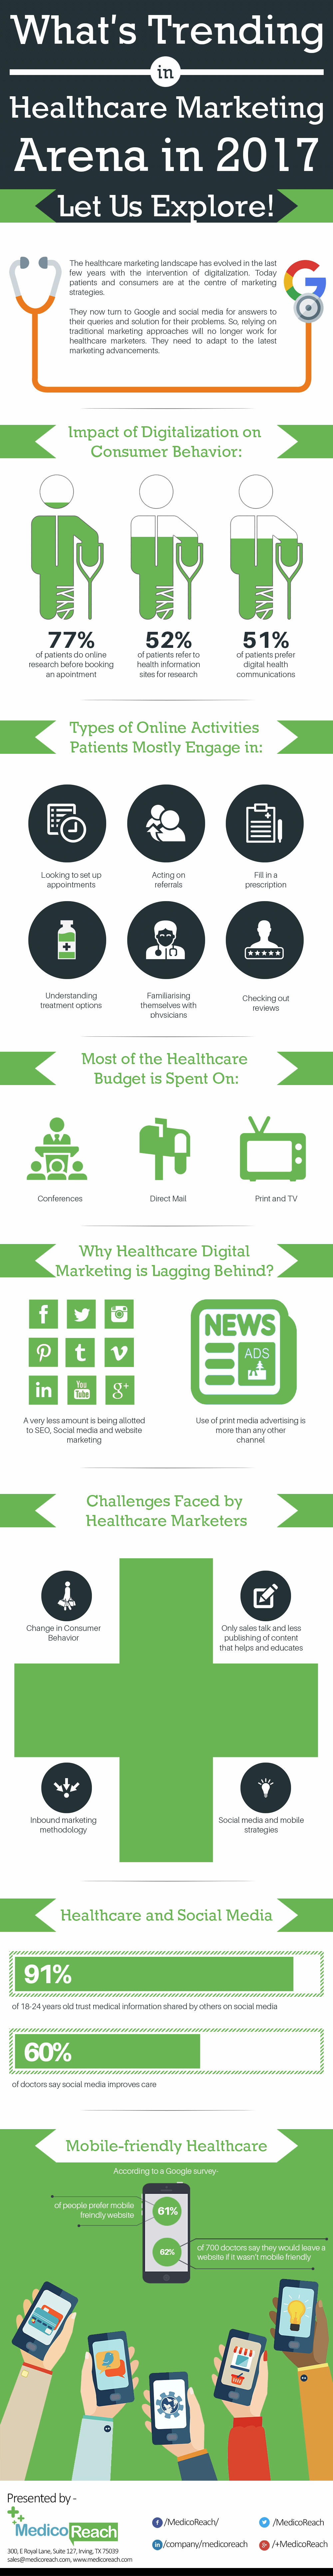 What's Trending Healthcare Marketing Arena in 2017?